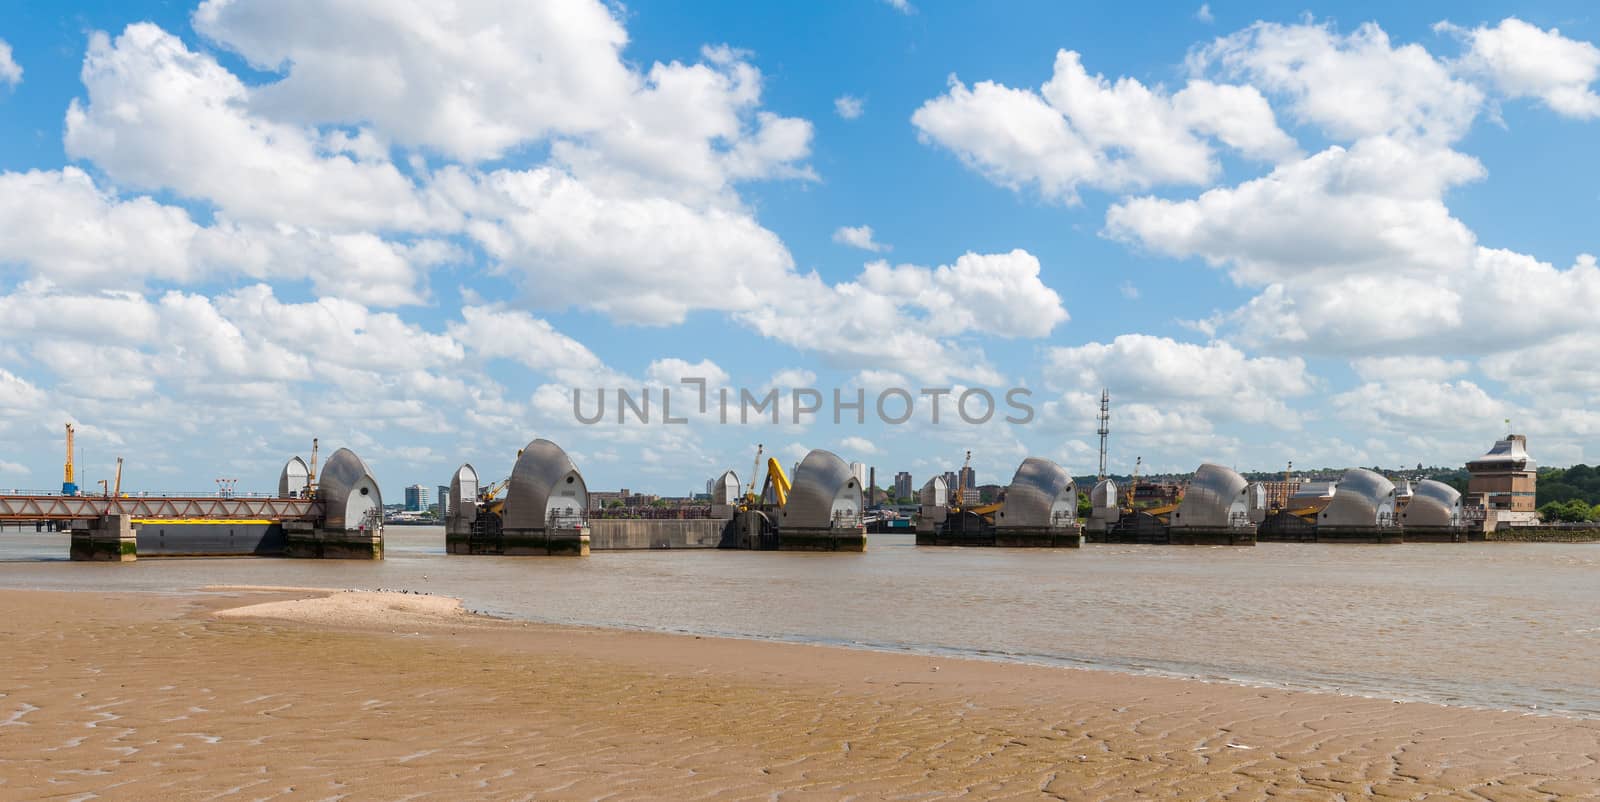 Thames Barrier in London by mkos83